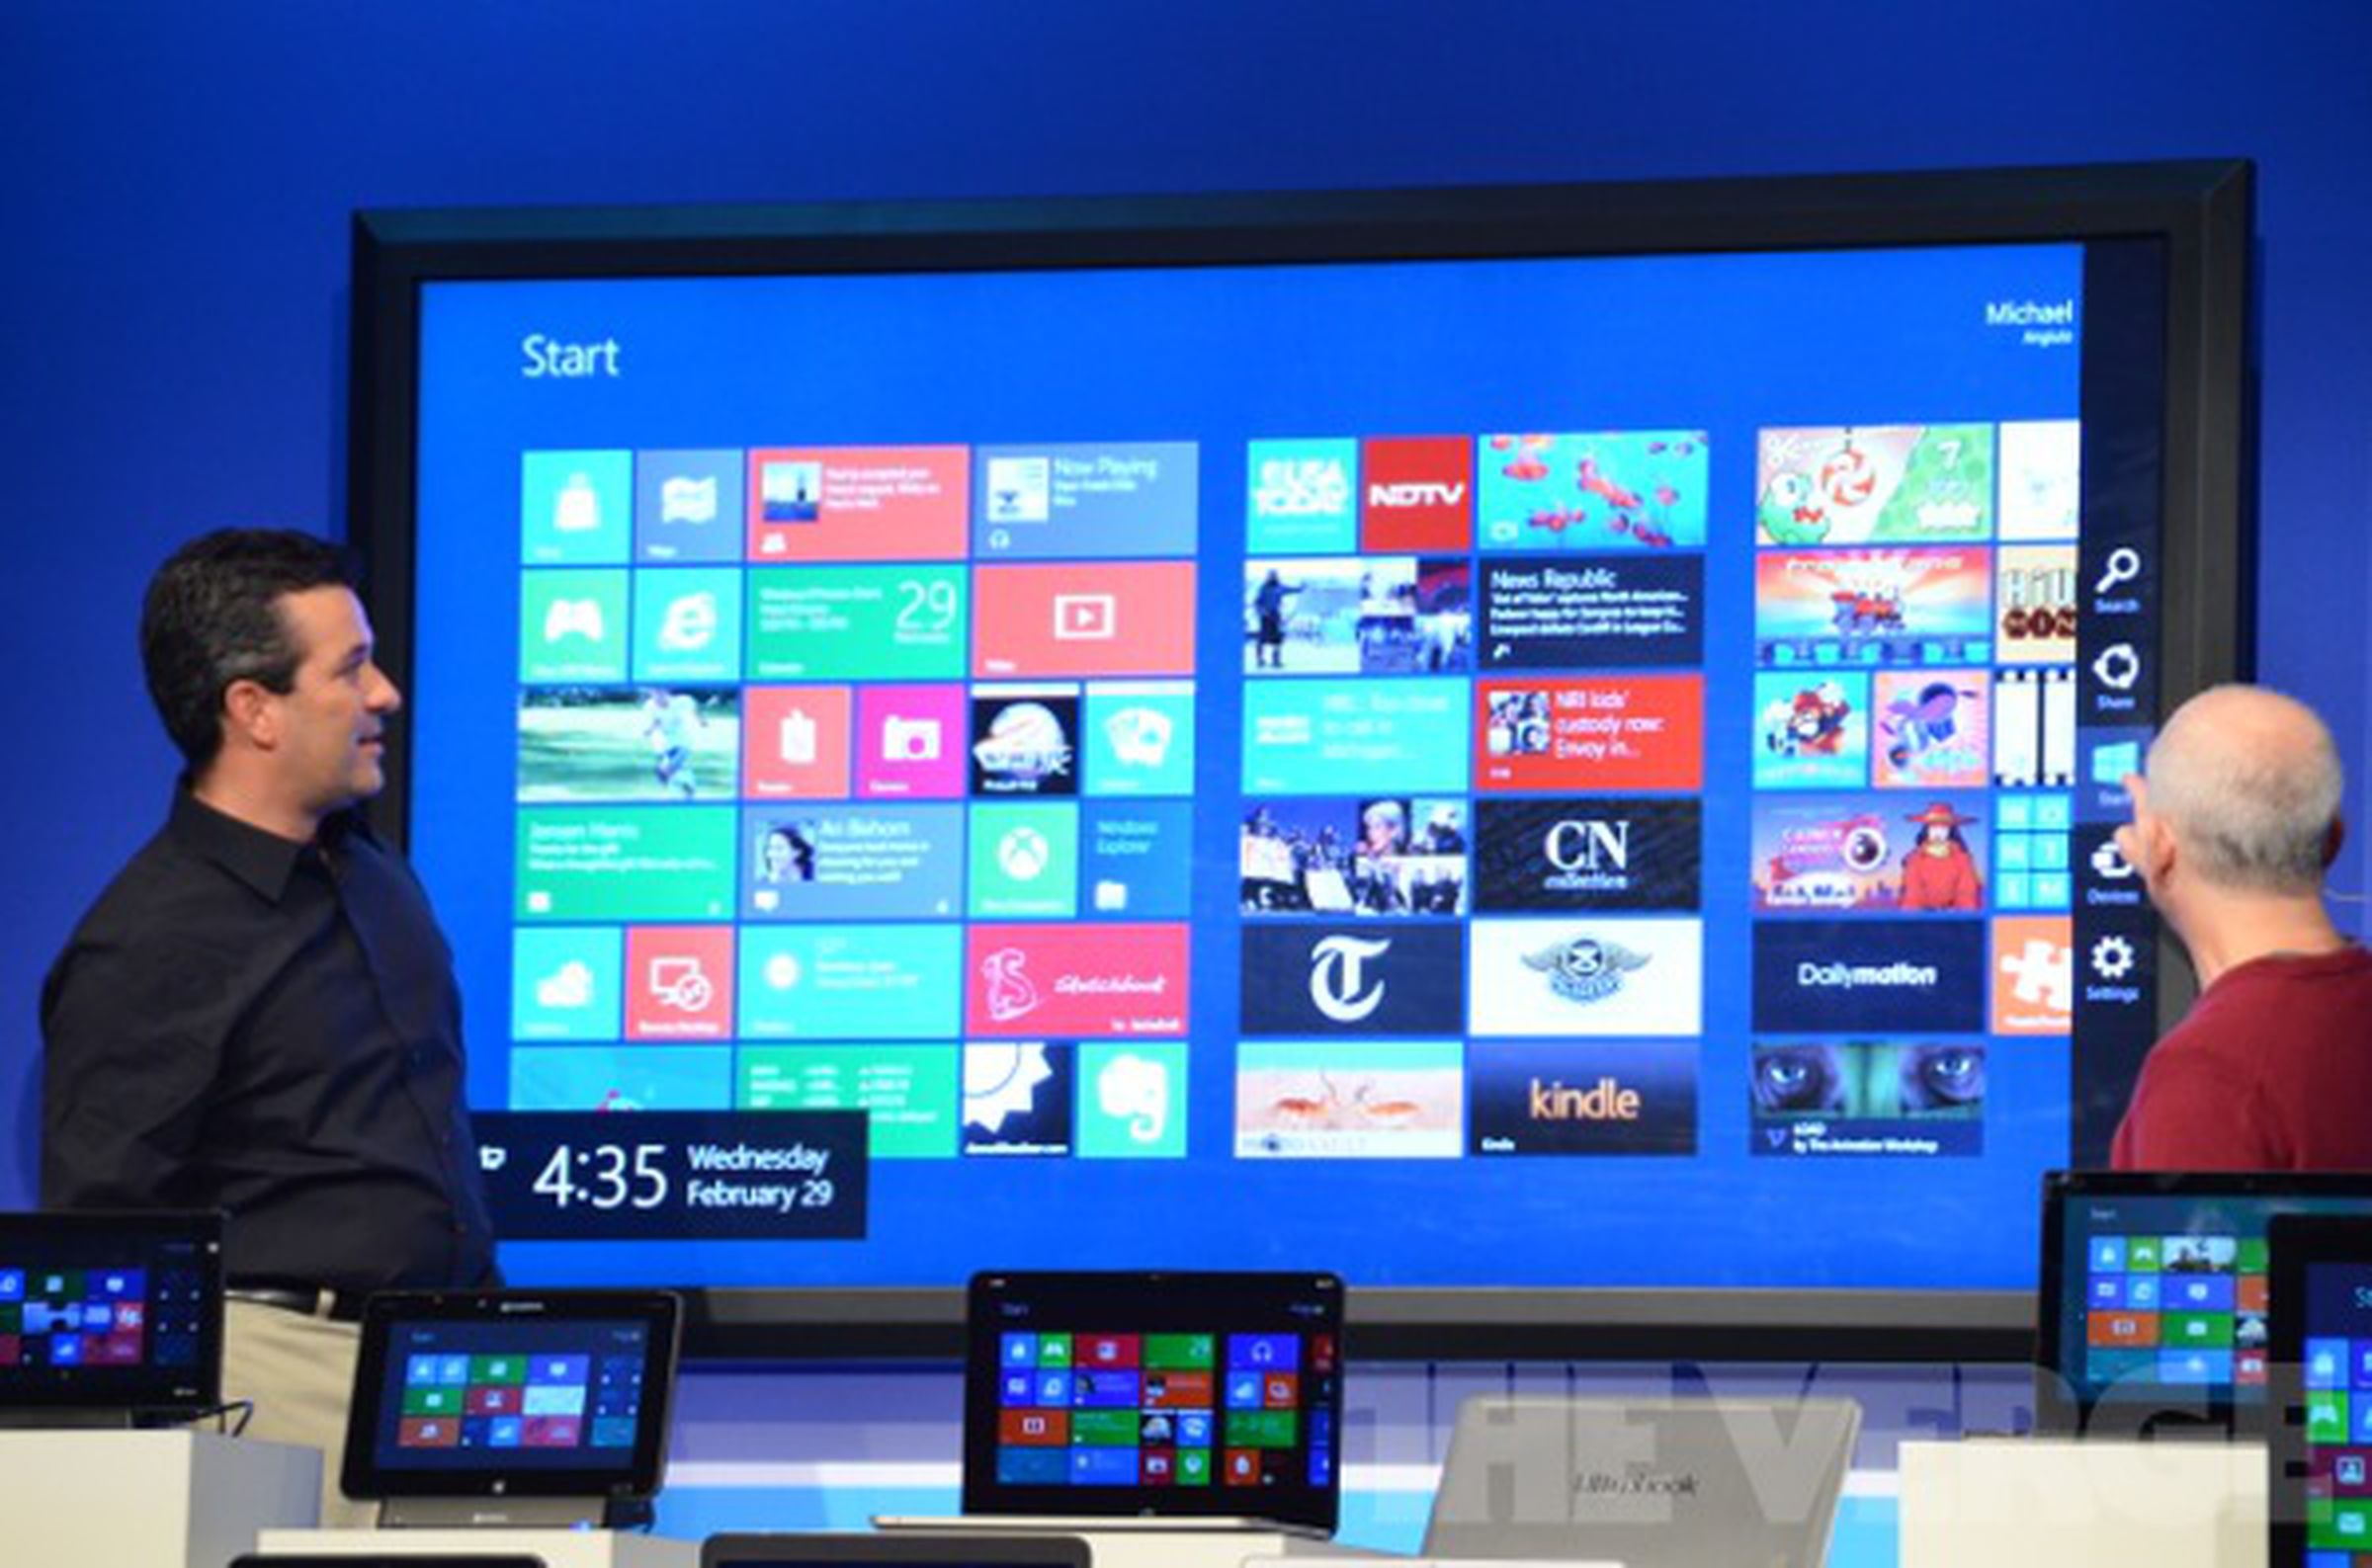 Windows 8 on 82-inch Perceptive Pixel PC pictures